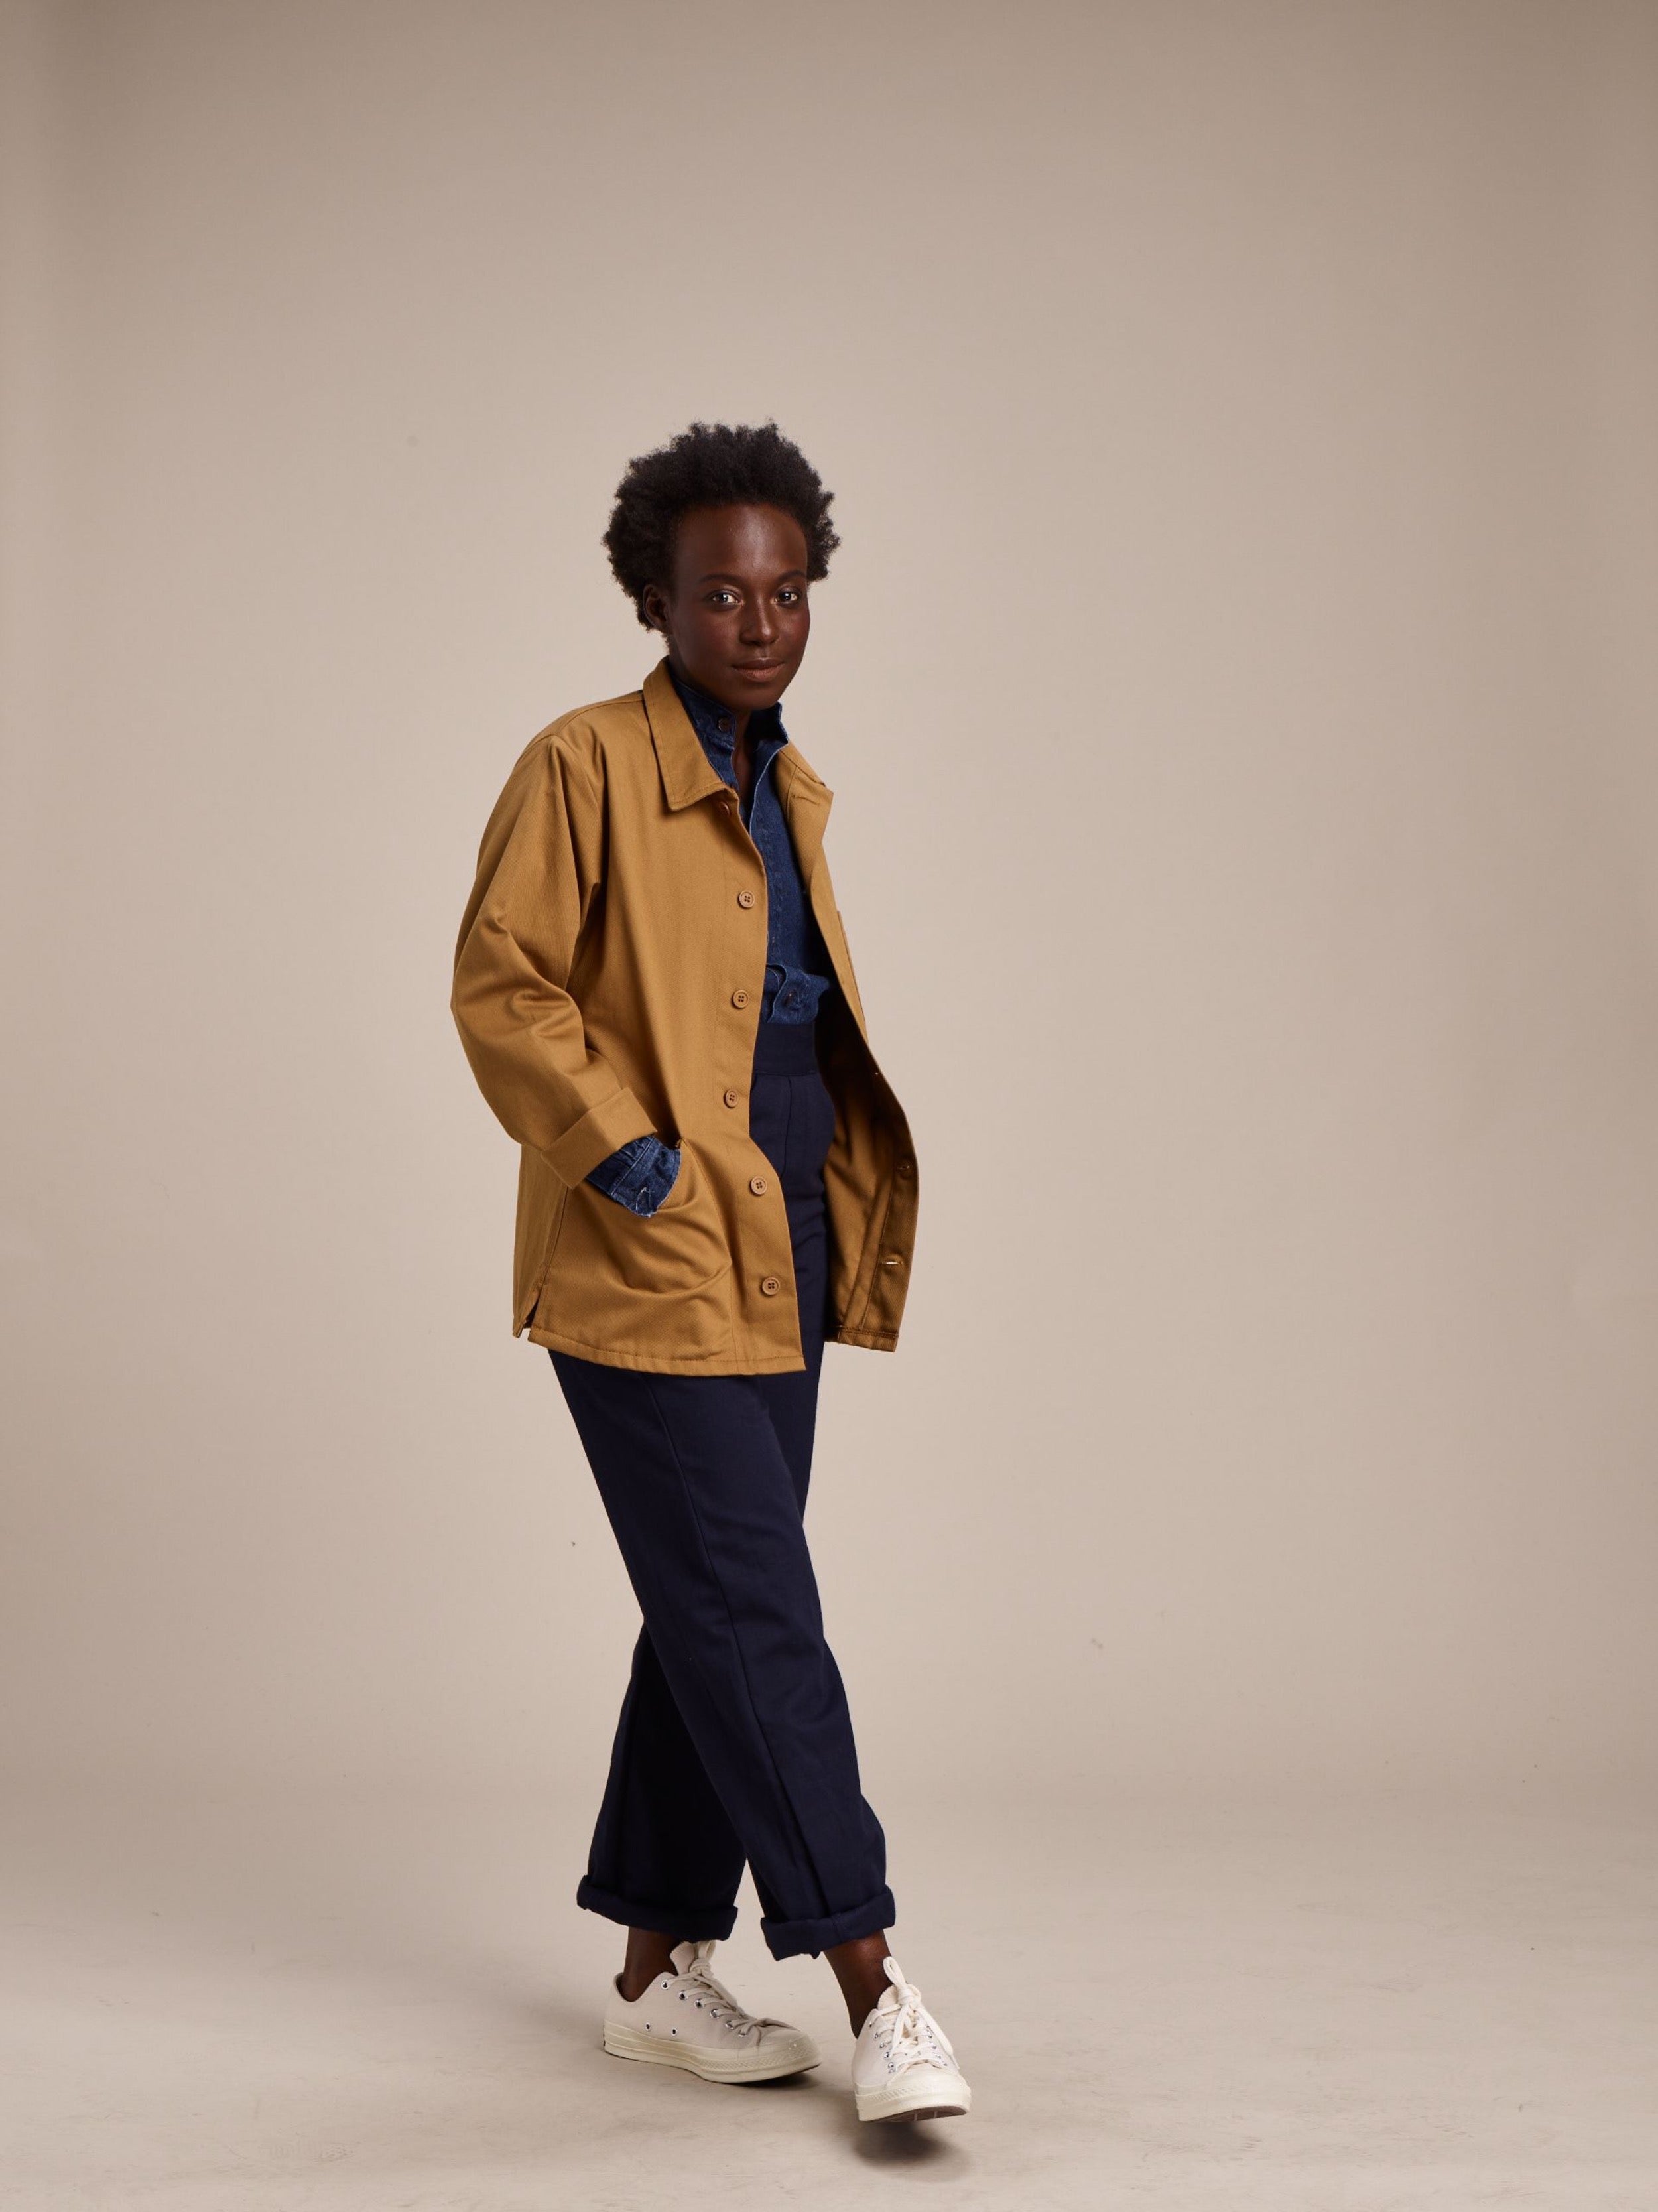 Woman wearing Carrier Company Work Jacket in Tan with Denim Work Shirt and Women's Work Trouser